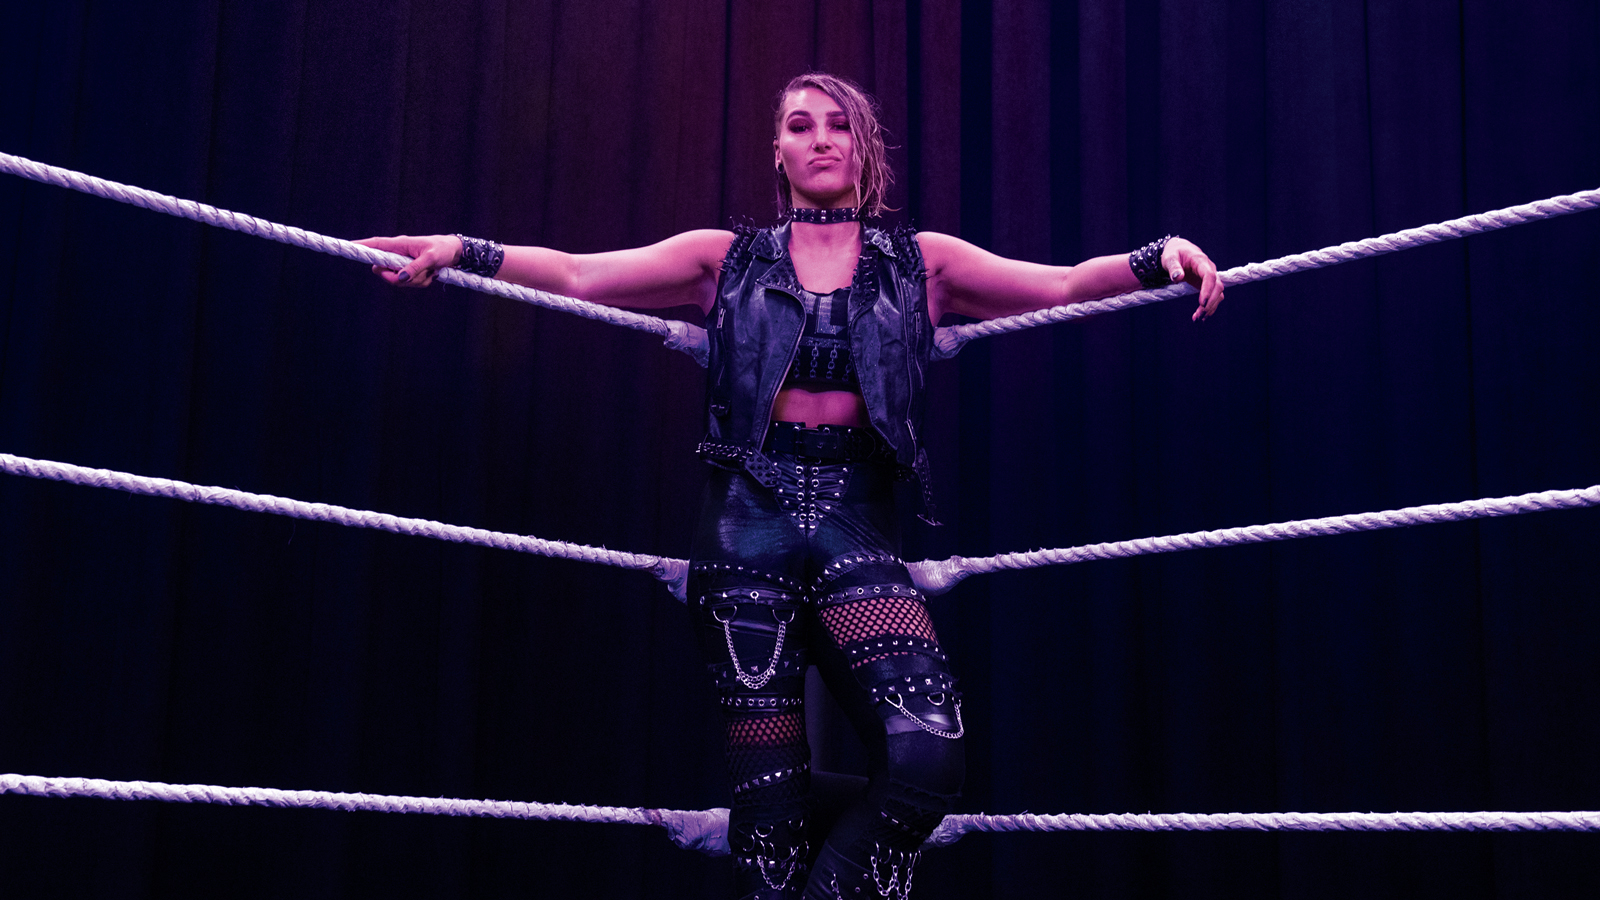 WWE Prohibits Rhea Ripley From Getting Tattoos On Her Body